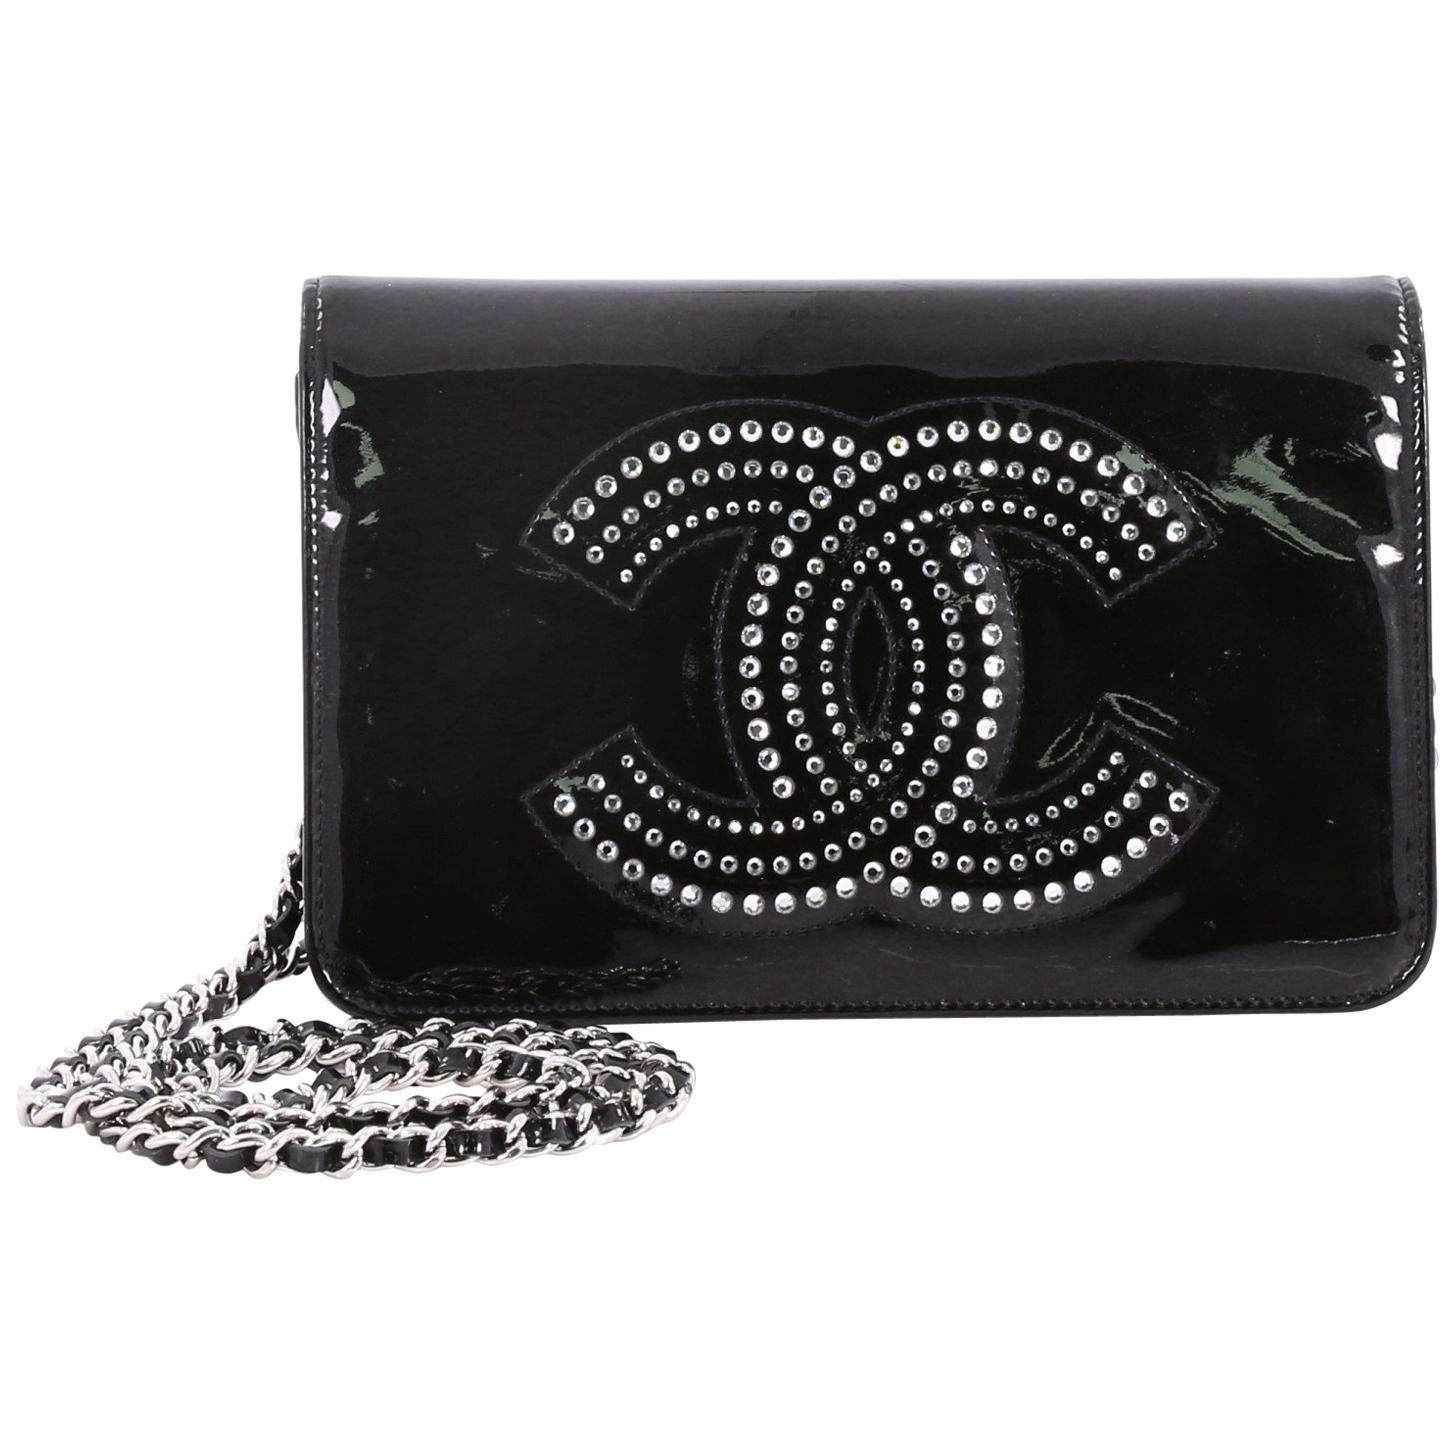 Chanel CC Wallet on Chain Strass Embellished Patent